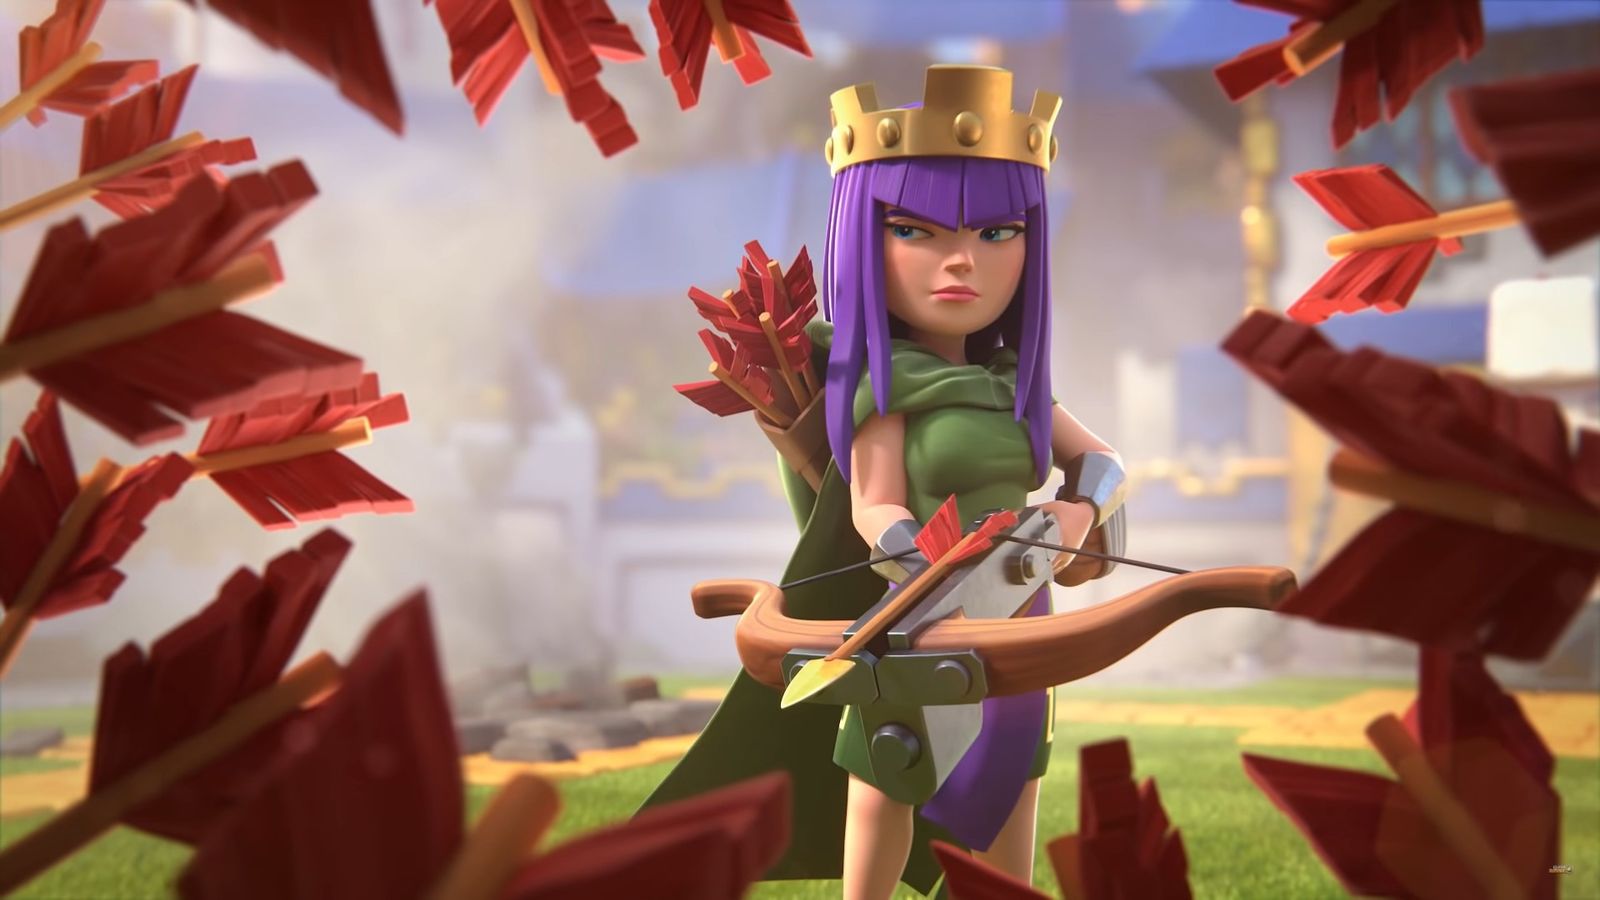 The archer queen unit from Clash Royale.